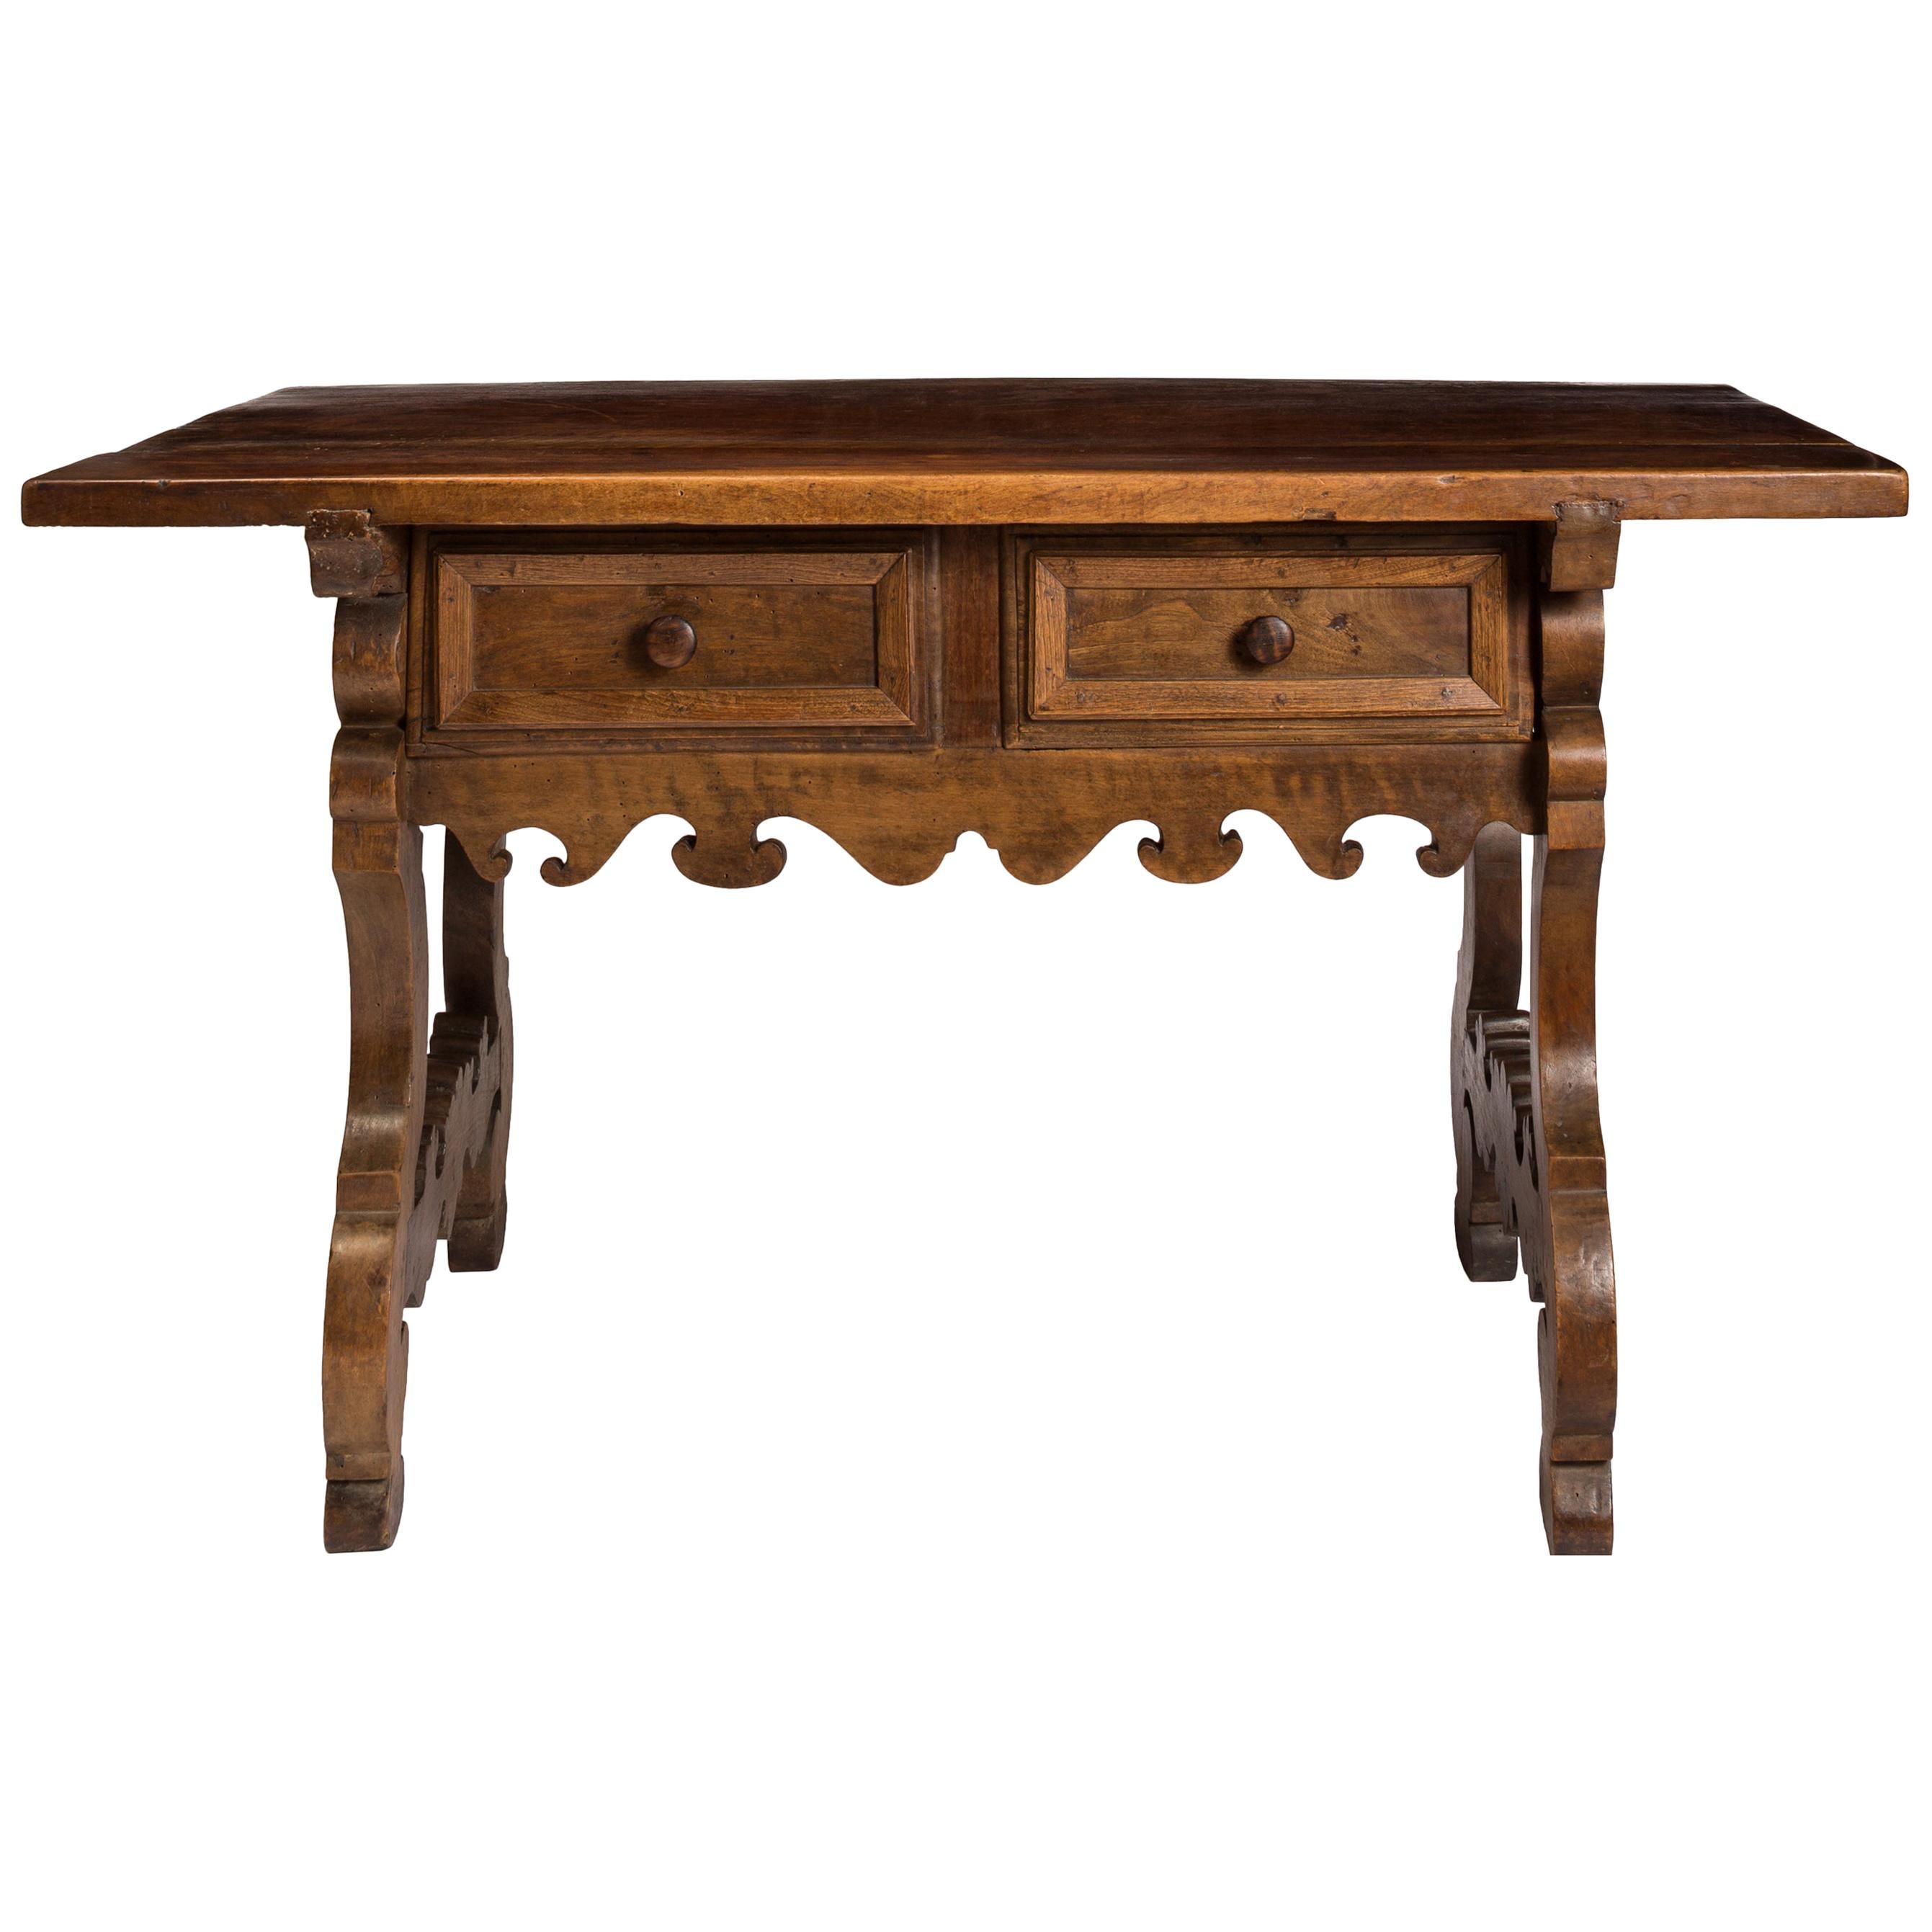 18th Century Spanish Baroque Trestle Style Writing Table Desk with Two Drawers